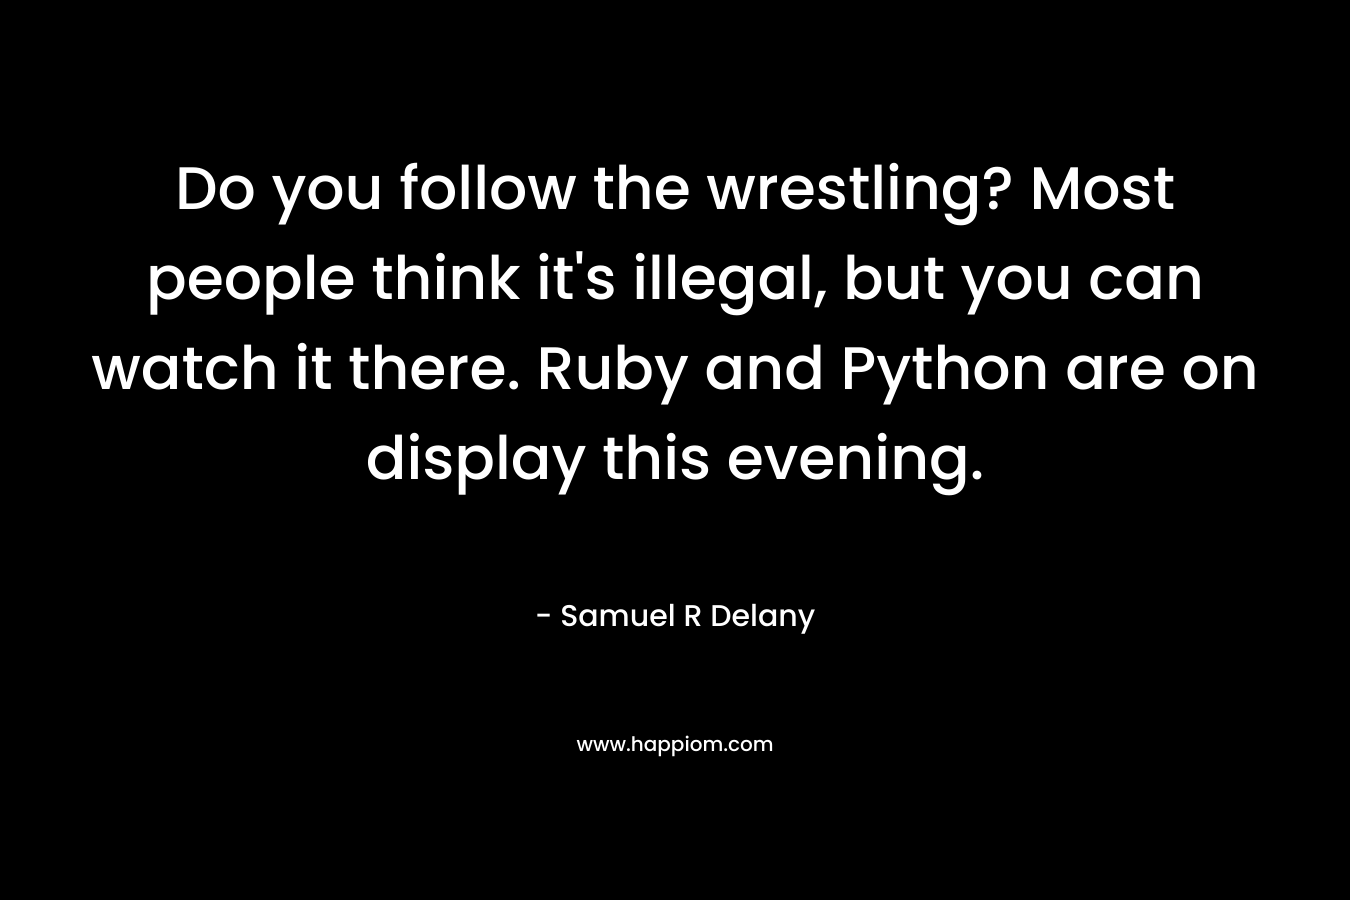 Do you follow the wrestling? Most people think it’s illegal, but you can watch it there. Ruby and Python are on display this evening. – Samuel R Delany